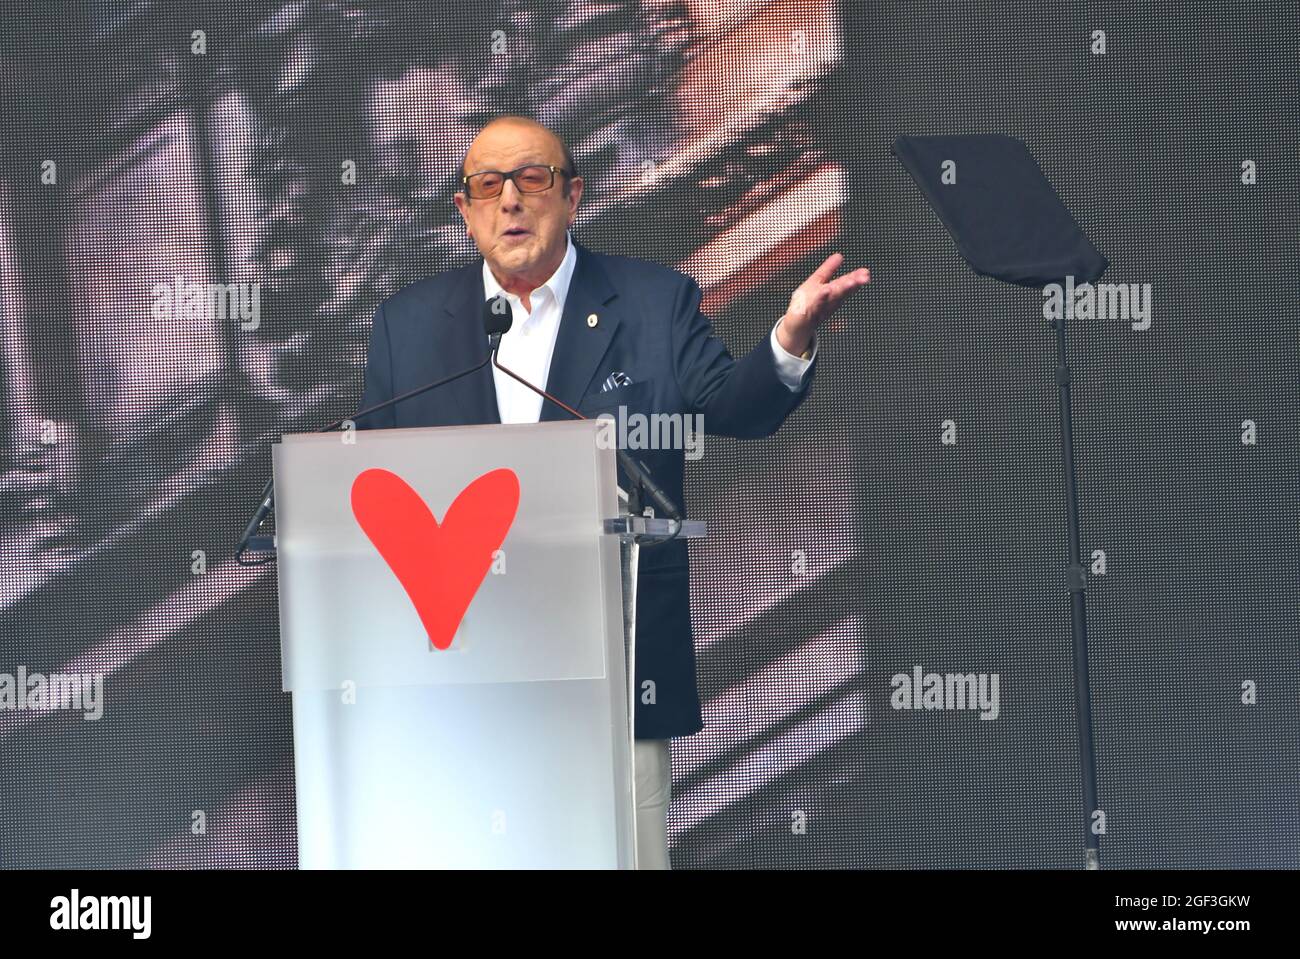 NEW YORK, NEW YORK - AUGUST 21: Clive Davis speaks during We Love NYC: The Homecoming Concert Produced by NYC, Clive Davis, and Live Nation on August 21, 2021 in New York City. (Photo by John Atashian) Stock Photo